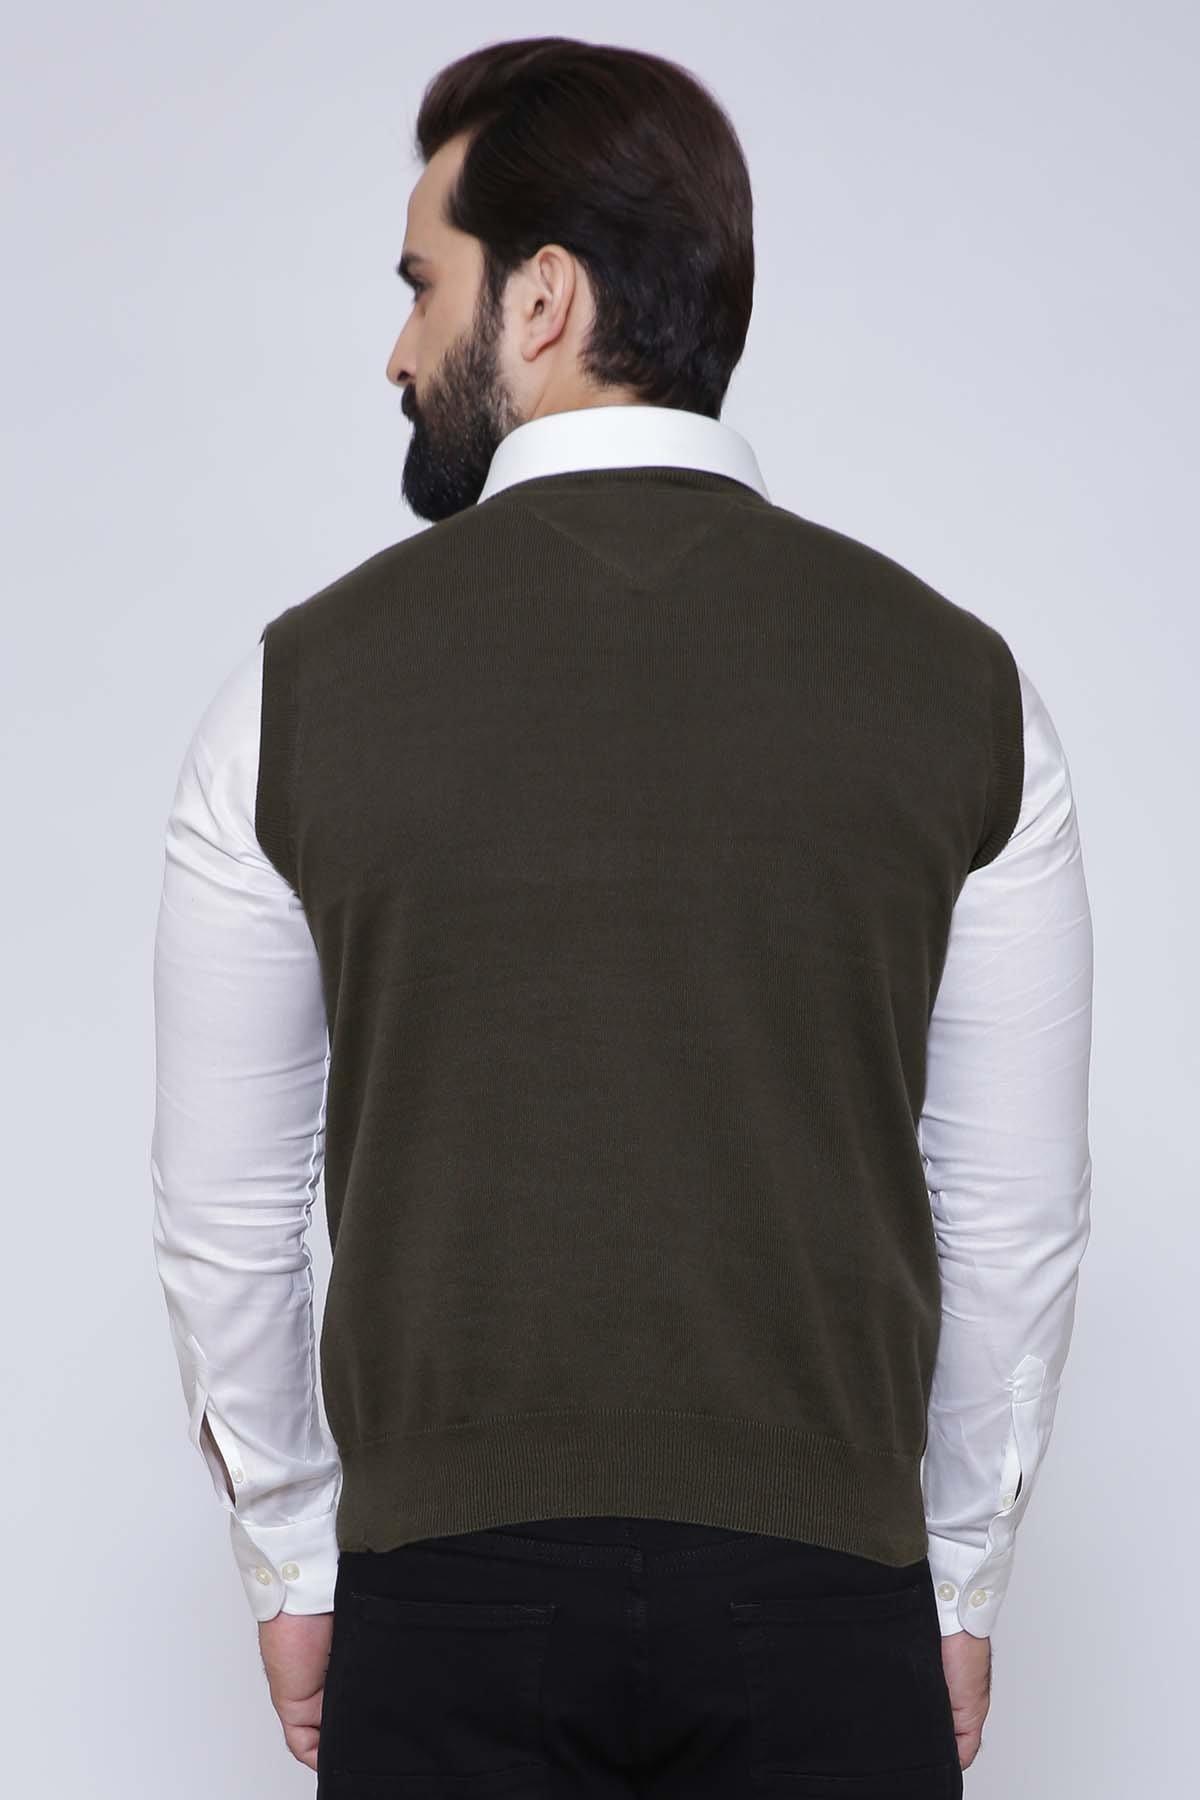 SWEATER V NECK  SLEEVE LESS  BOTTLE GREEN at Charcoal Clothing